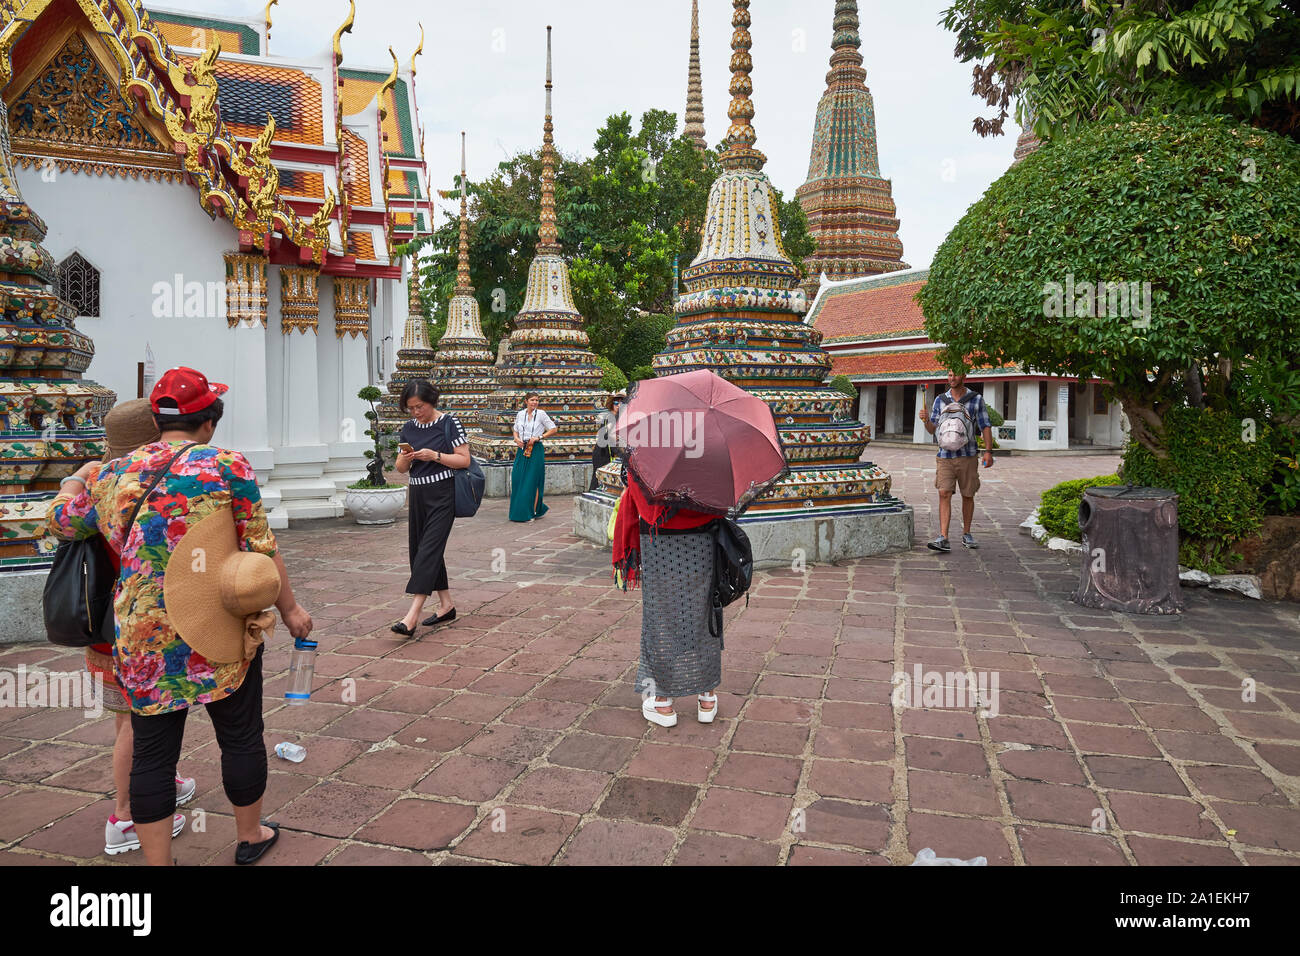 Visitors in the grounds of Wat Po, Bangkok, Thailand, home of the famous Reclining Buddha and one of the most iconic temples in Thailand Stock Photo